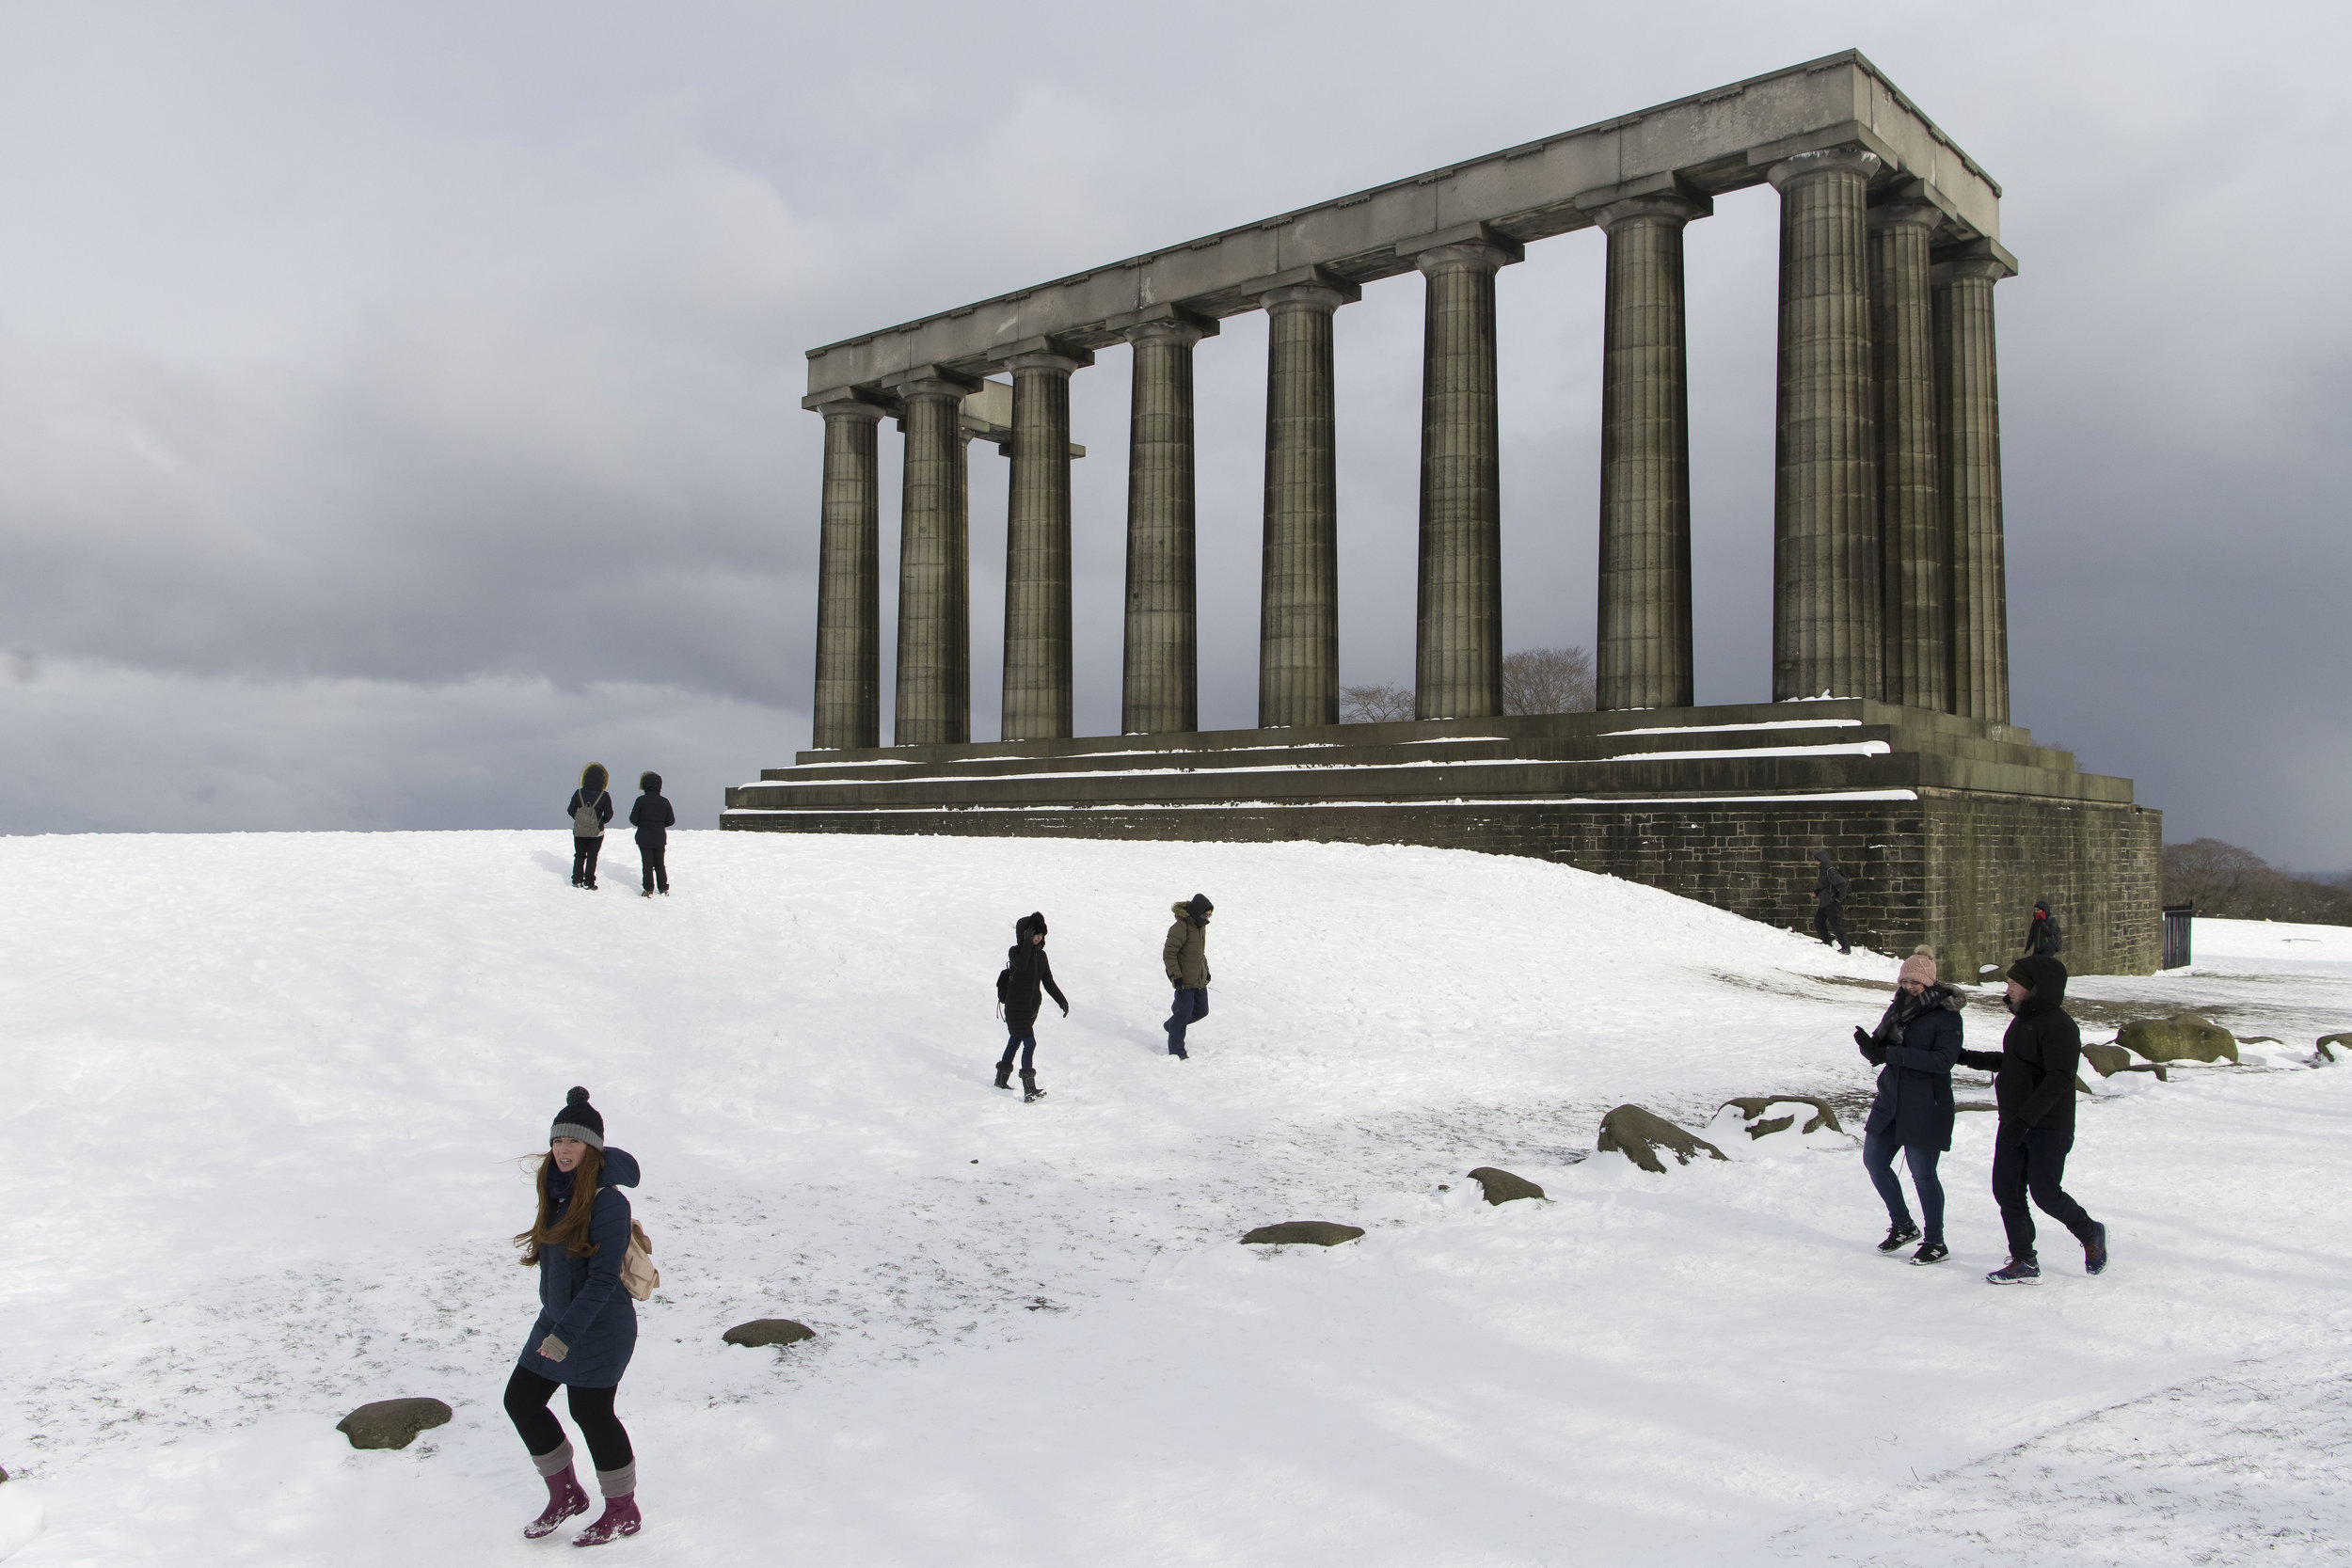  EDINBURGH, SCOTLAND - MARCH 1: A National Monument seen covered in snow at Calton Hill which overlooks the city centre following heavy snowfall on March 1, 2018 in Edinburgh, United Kingdom. People have been warned not to make unnecessary journeys a